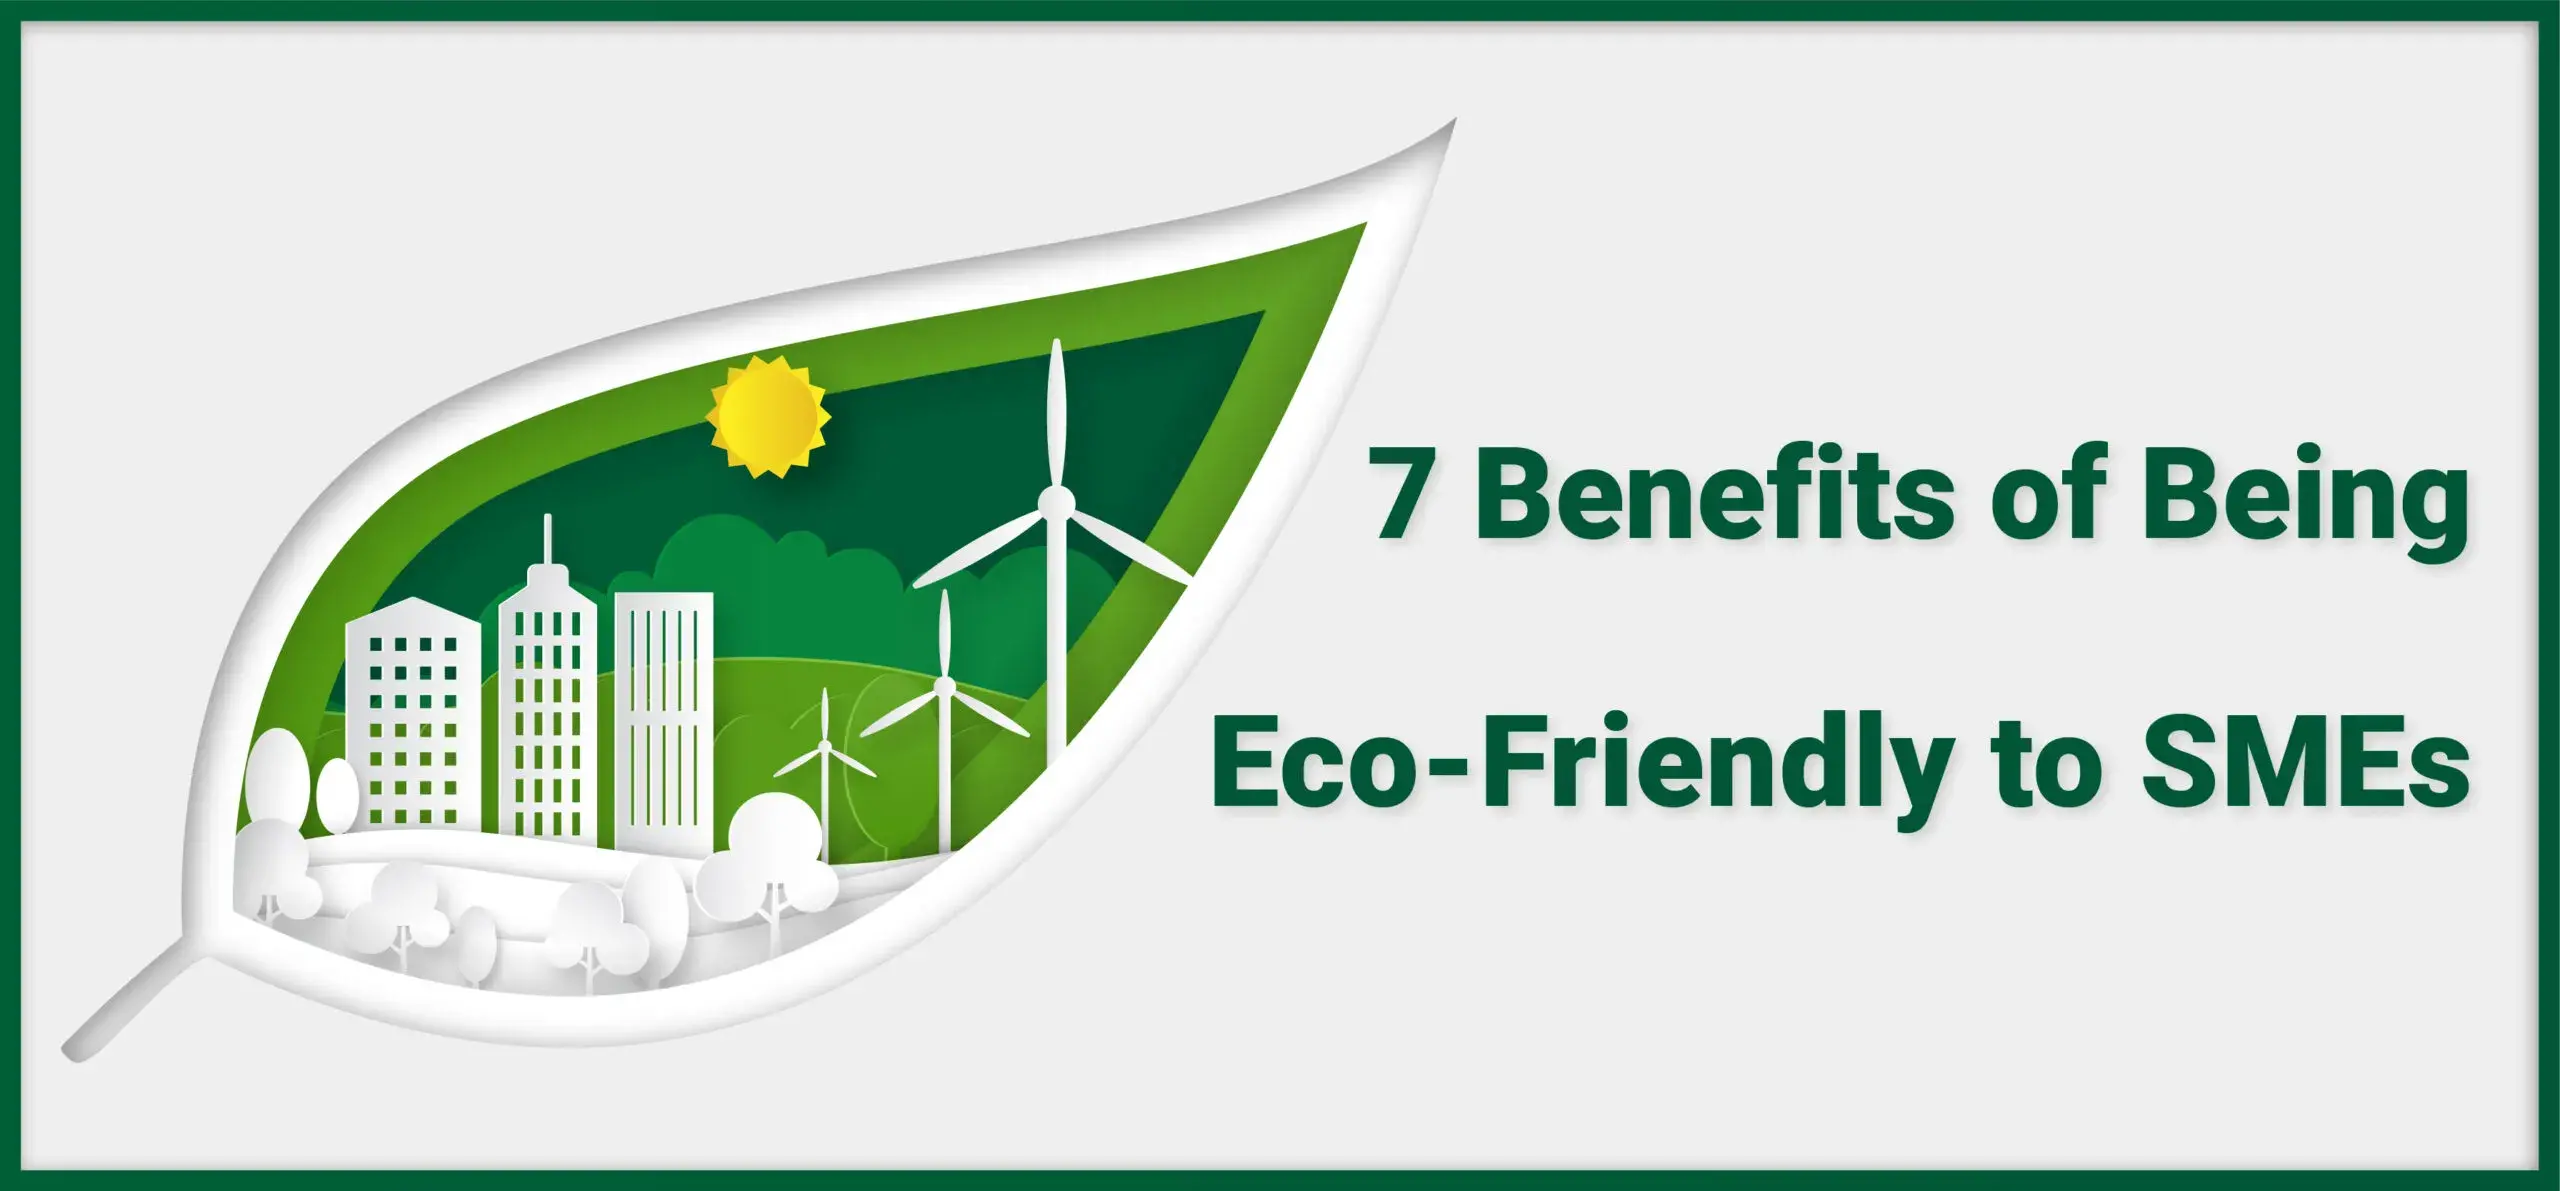 7 Benefits of Being Eco-Friendly to SMEs